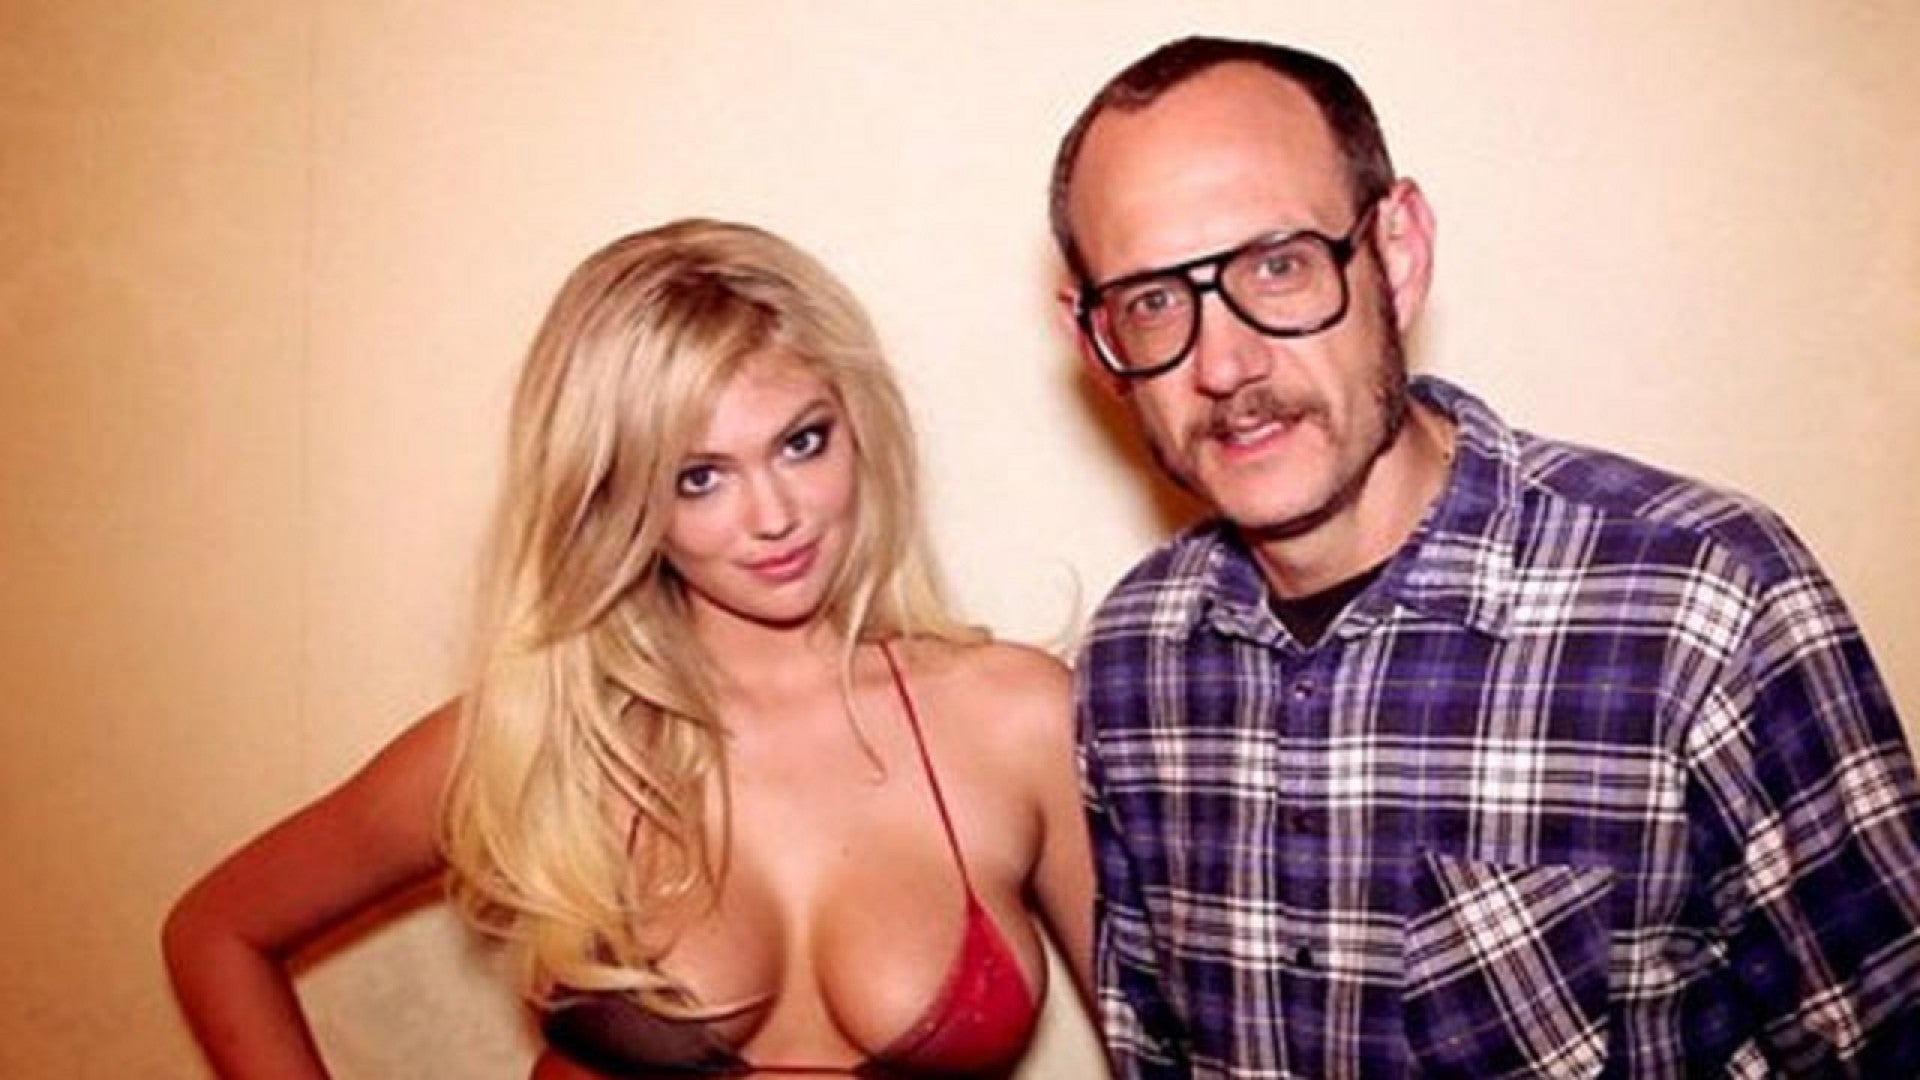 andrew avramenko recommends kate upton mac daddy pic